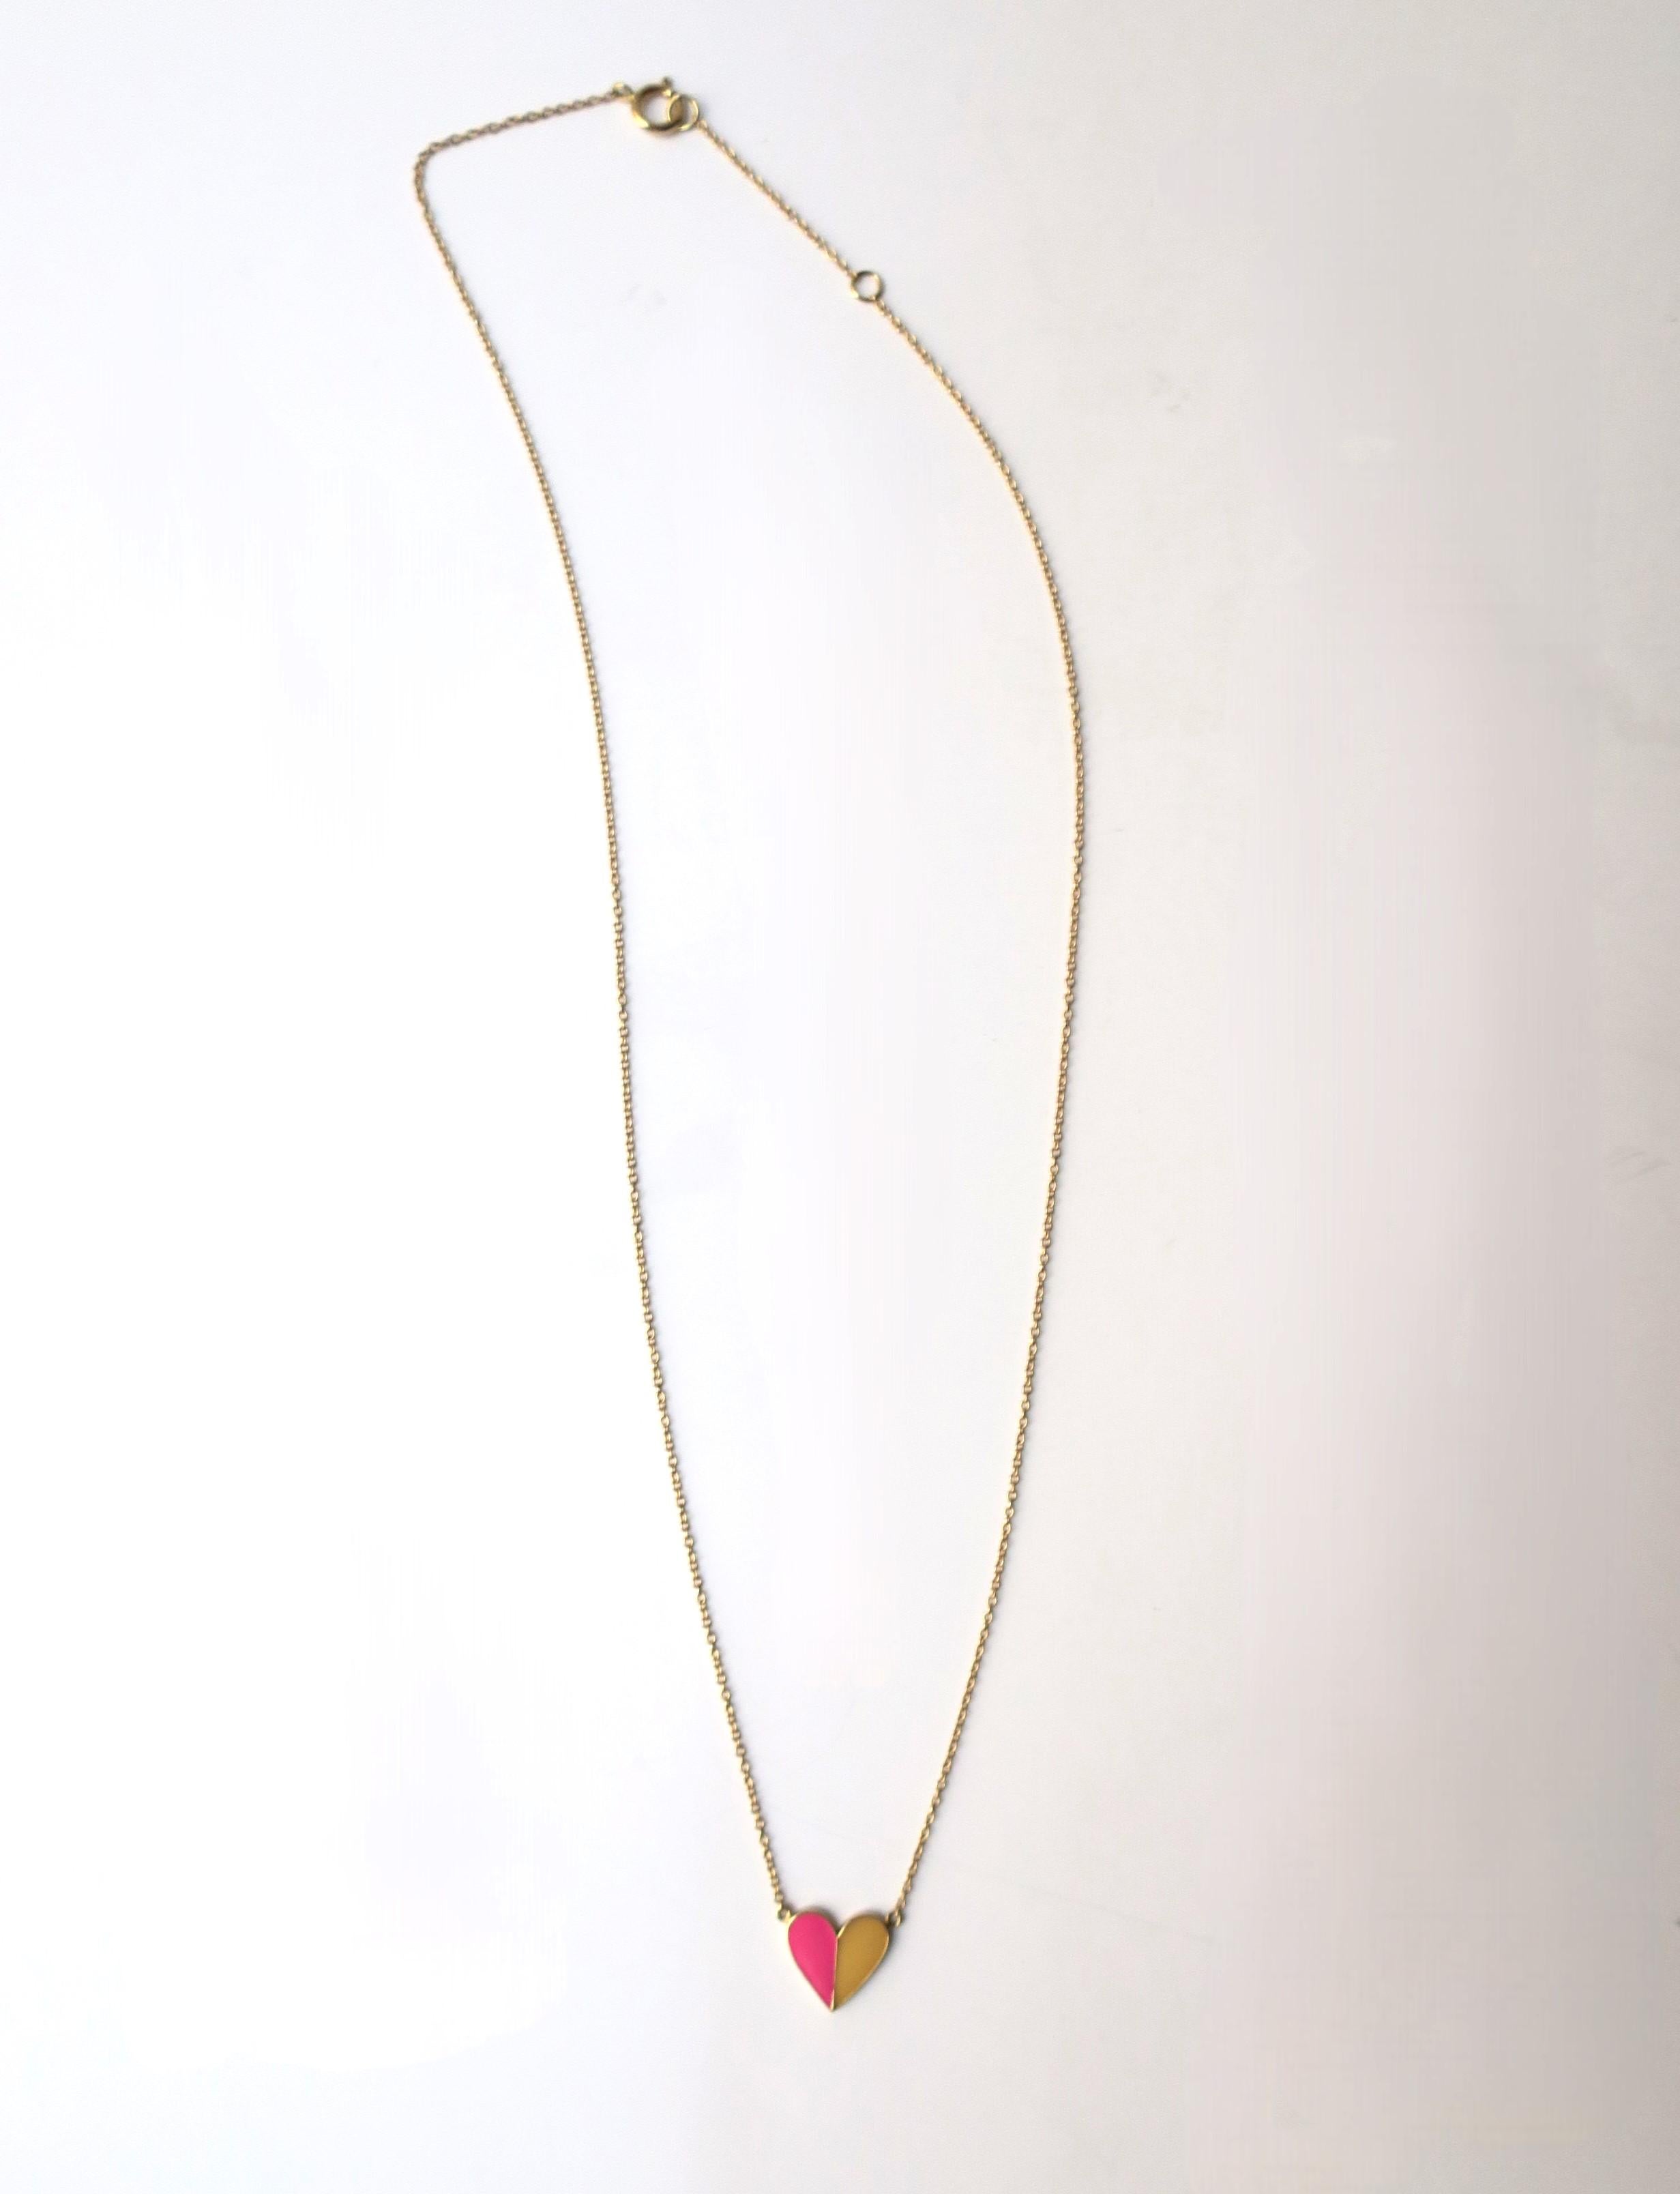 Contemporary Italian Gold and Enamel Heart Necklace For Sale